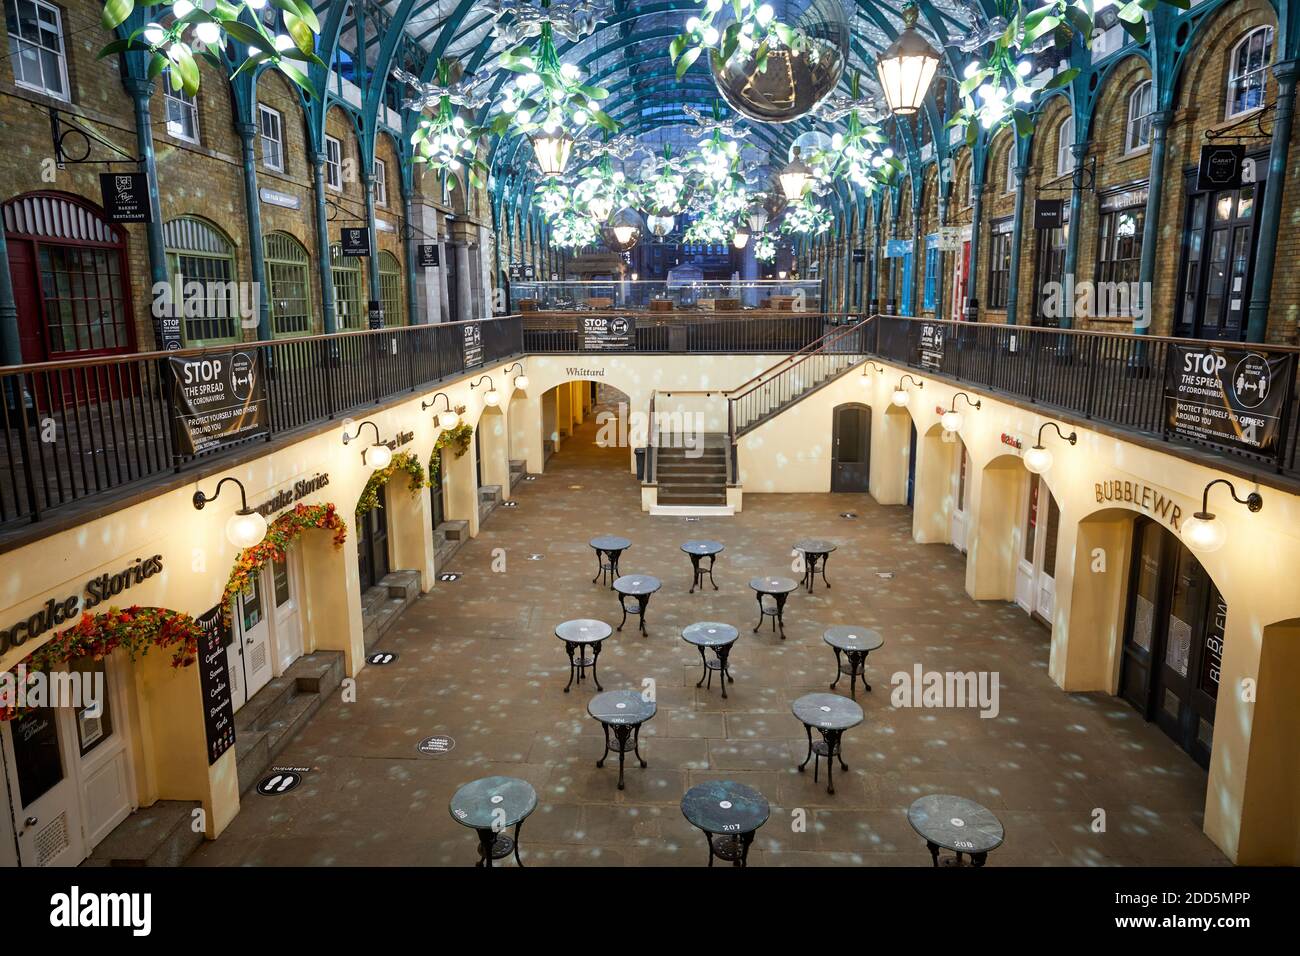 London, UK. - 21 Nov 2020: Socially distanced tables - due to the coronavirus pandemic - sit under this years Christmas decrorations at Covent Garden. Stock Photo